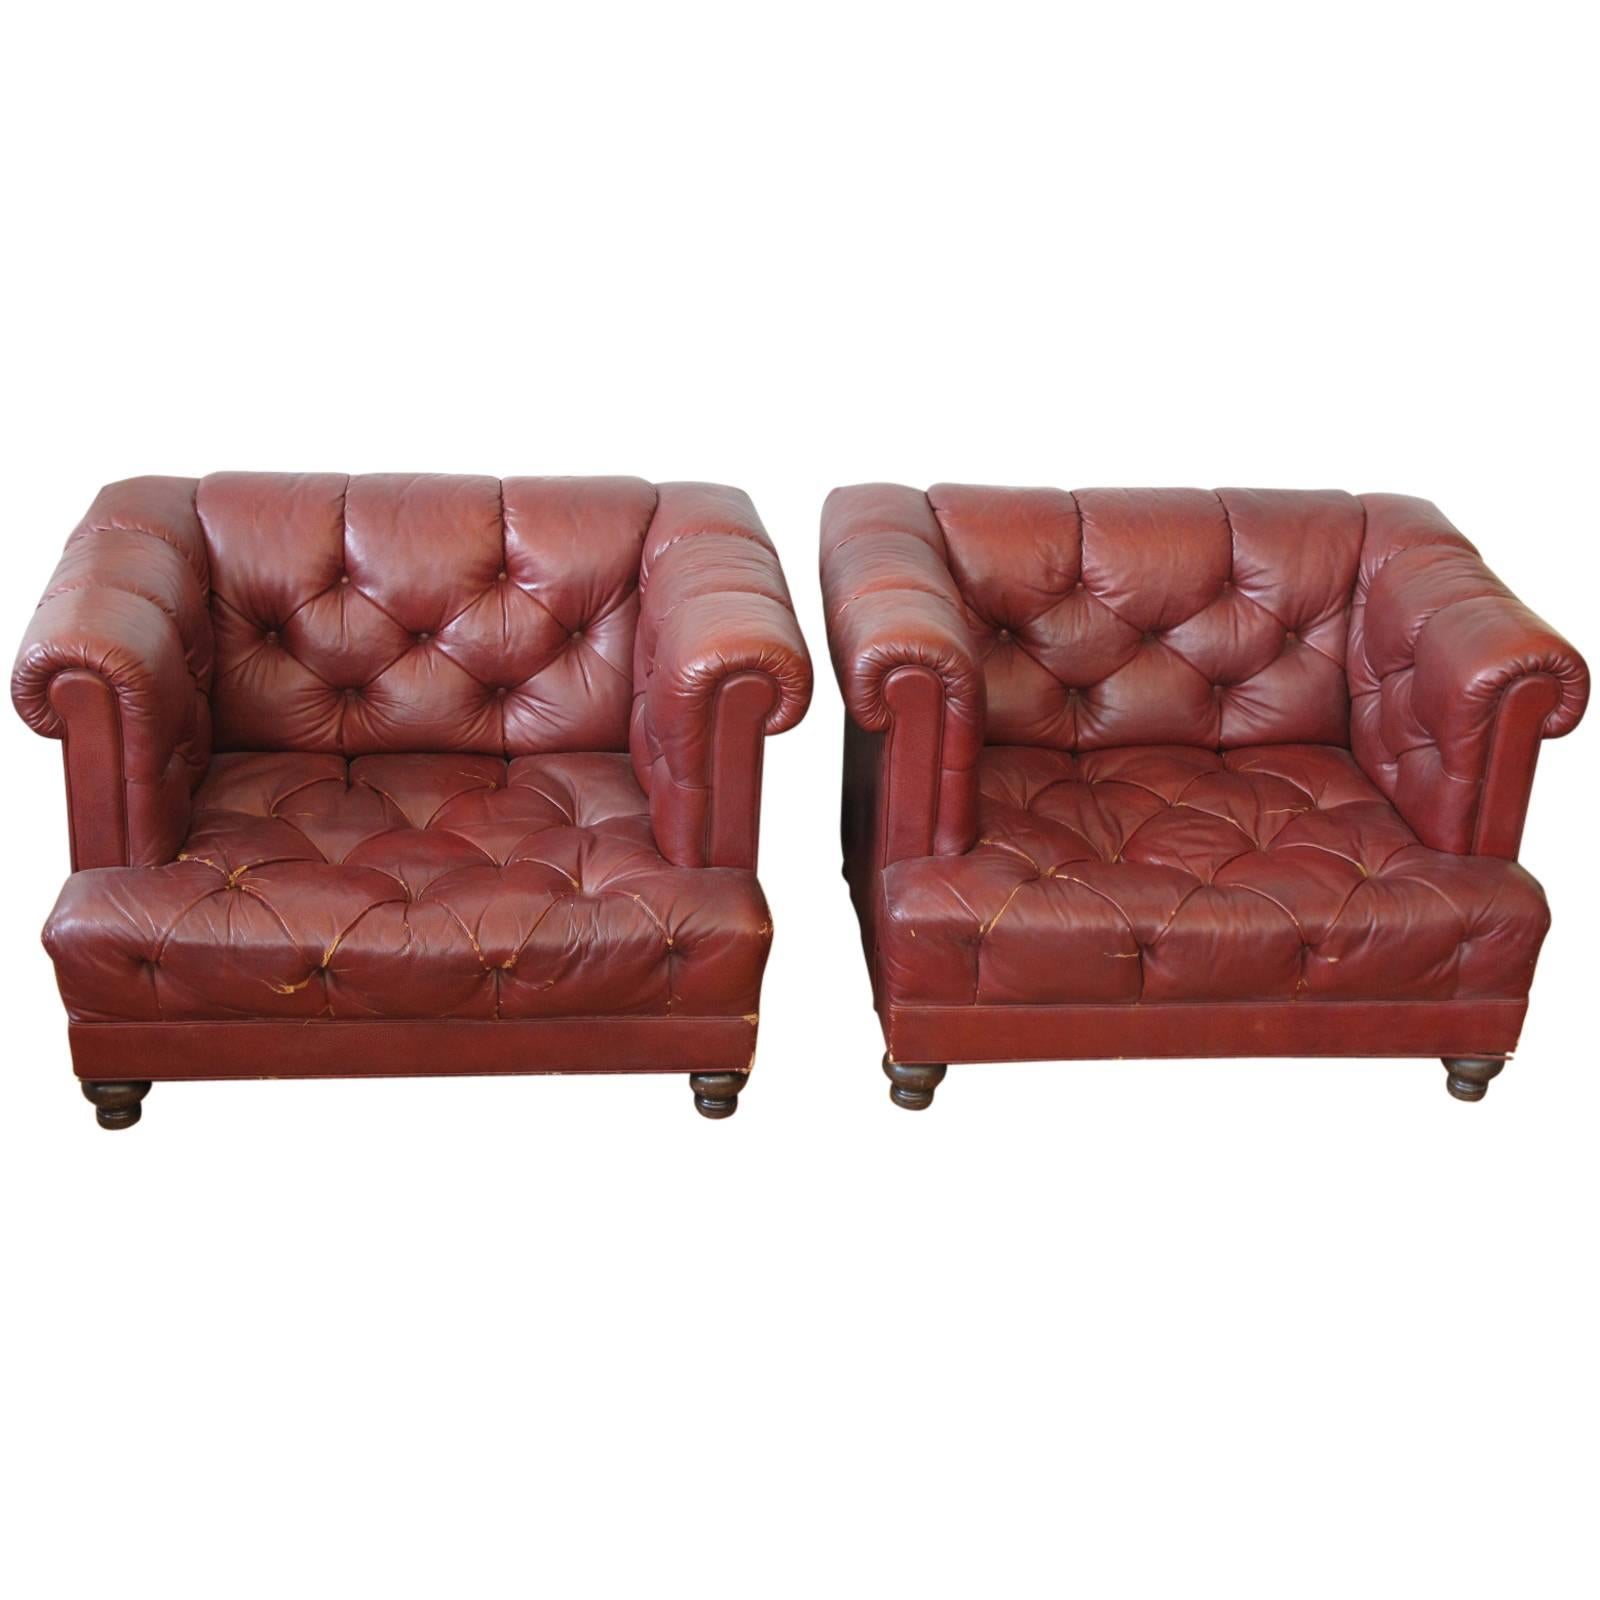 Matched Pair of Oxblood Chesterfield Club Chairs